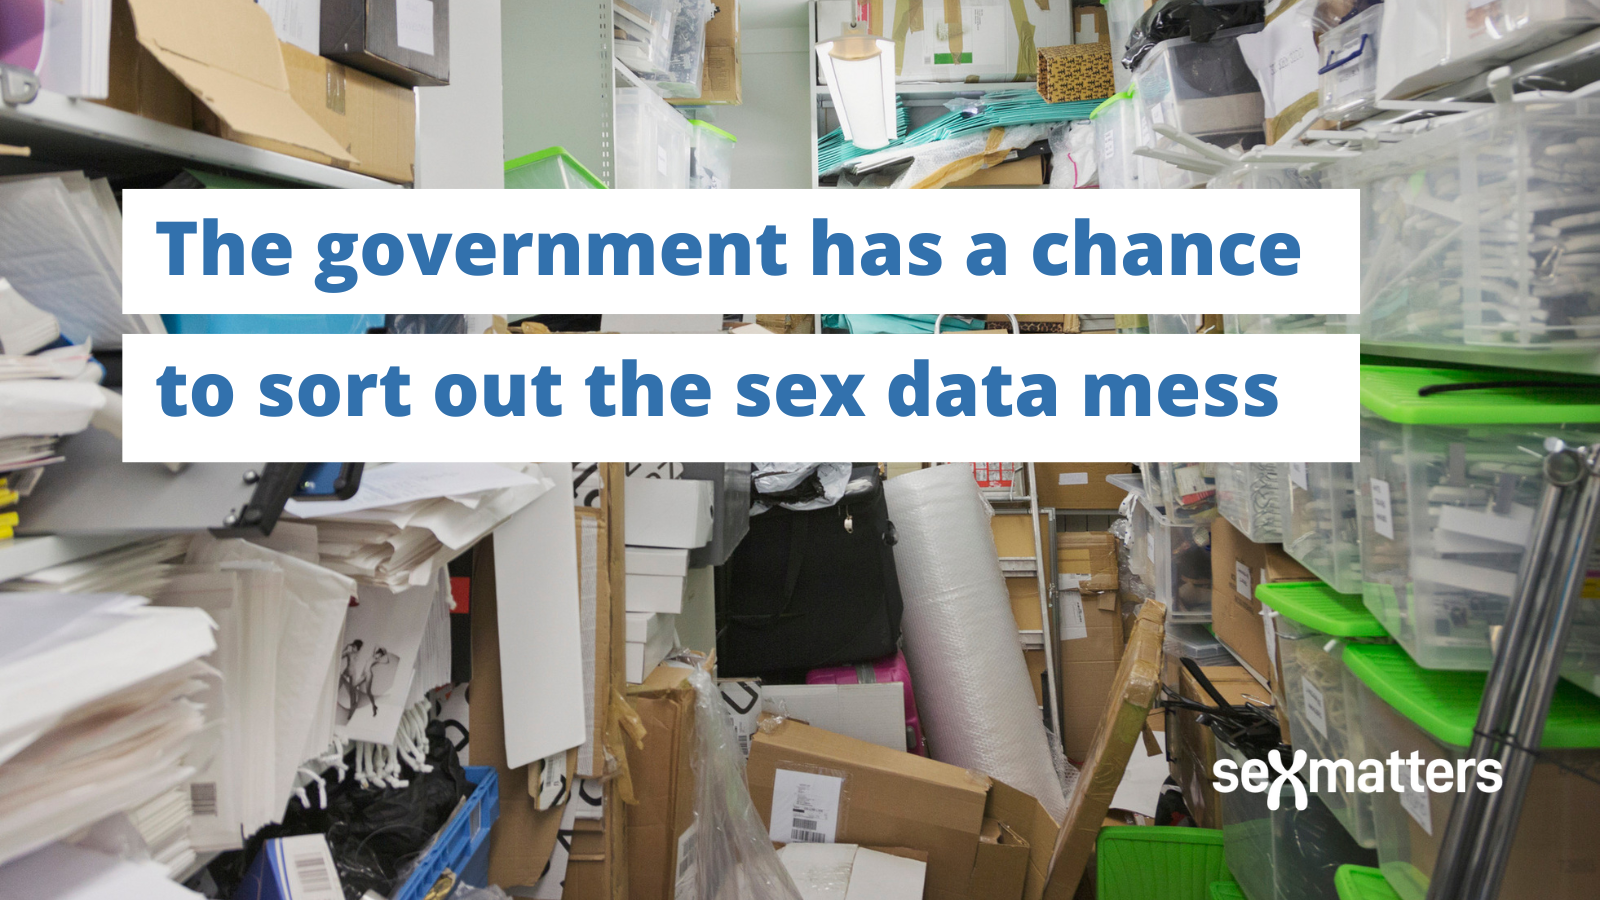 The government has a chance to sort out the sex data mess